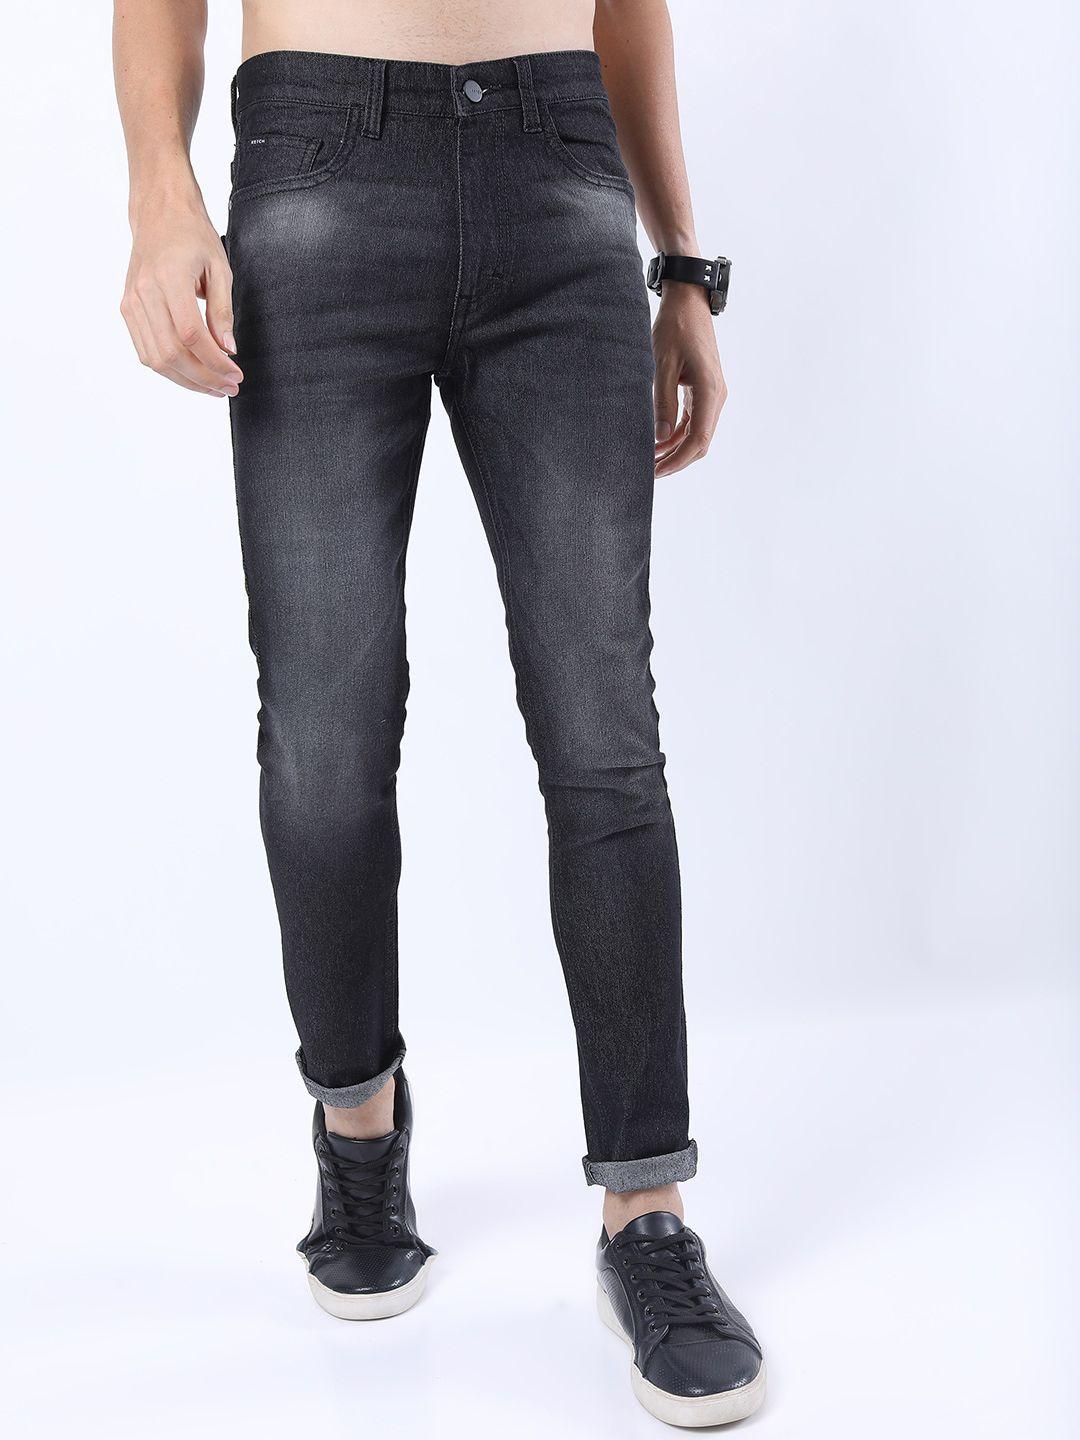 ketch-men-charcoal-skinny-fit-heavy-fade-stretchable-jeans